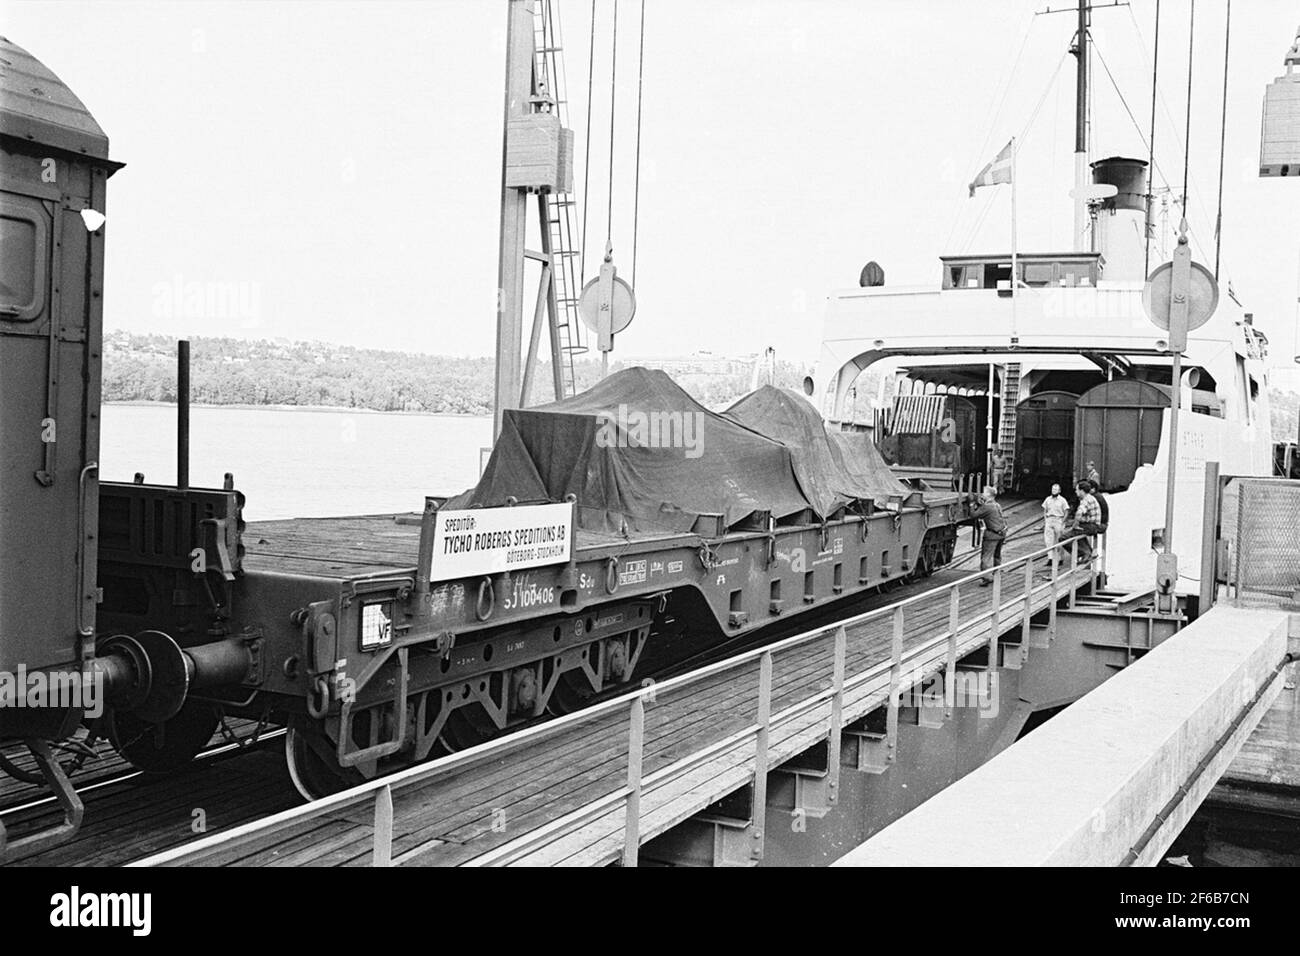 State Railways, SJ SDU 100406. Train ferry S / S Starke, Trelleborg in Valtahamnen. The ferry was built in 1931 by Deutsche Werke, Kiel, Germany and was delivered to the state's railways, SJ, Malmö. Has mainly trafficked trelleborg - Sassnitz. In 1967 on the new train ferry joint between the Valtahamn in Stockholm and Naantali outside Turku Stock Photo